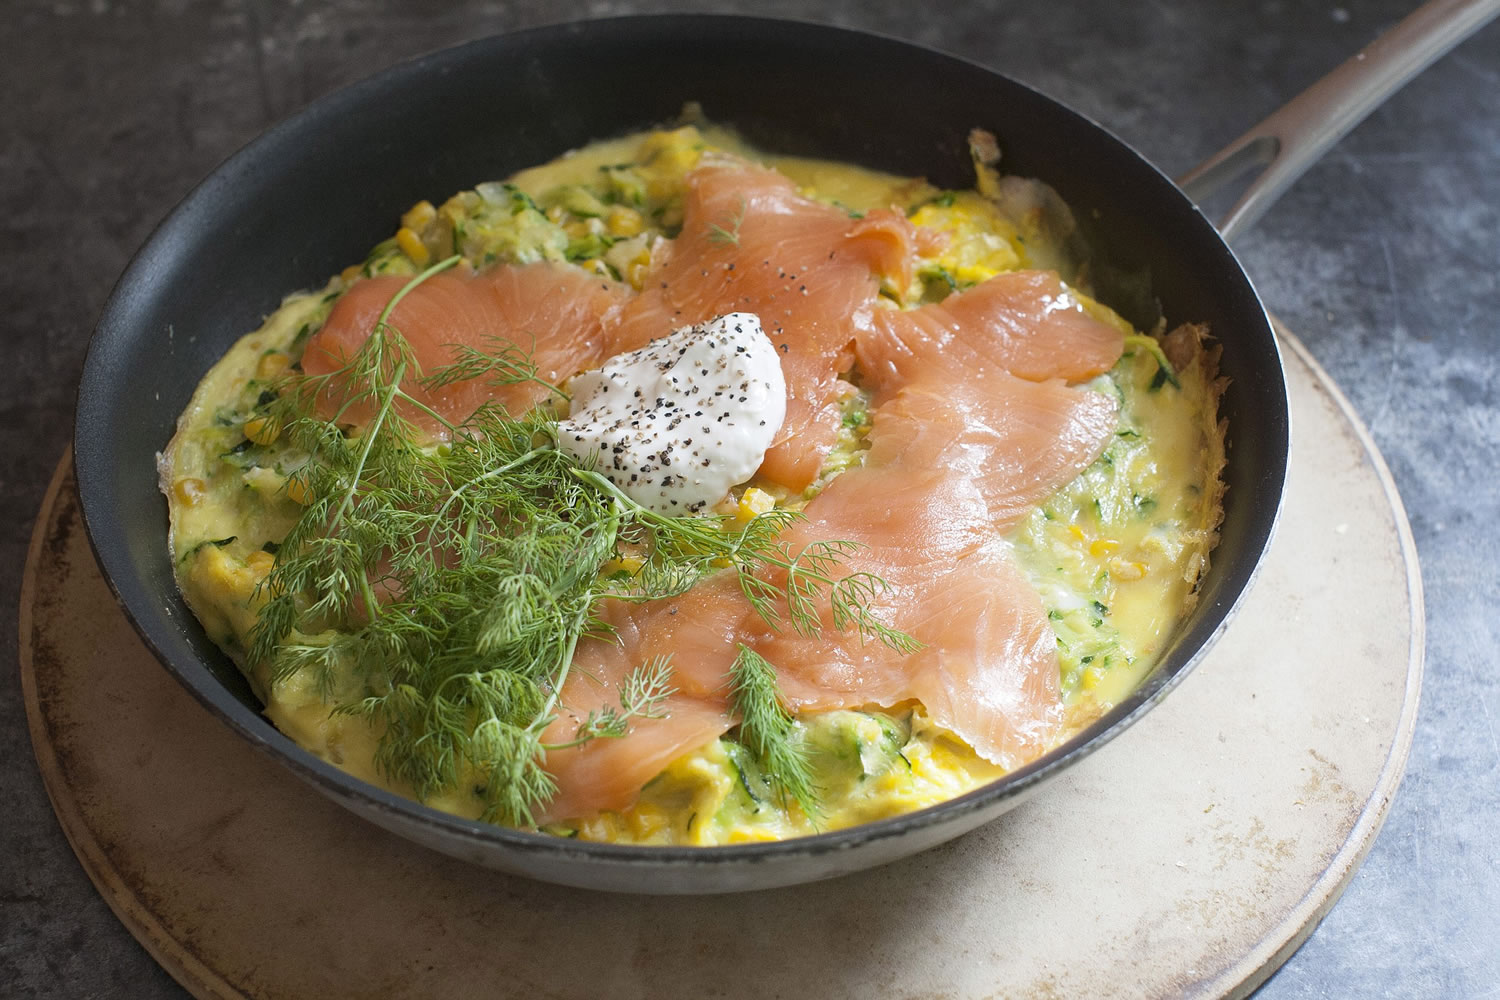 An Open Faced Corn And Zucchini Omelet With Smoked Salmon